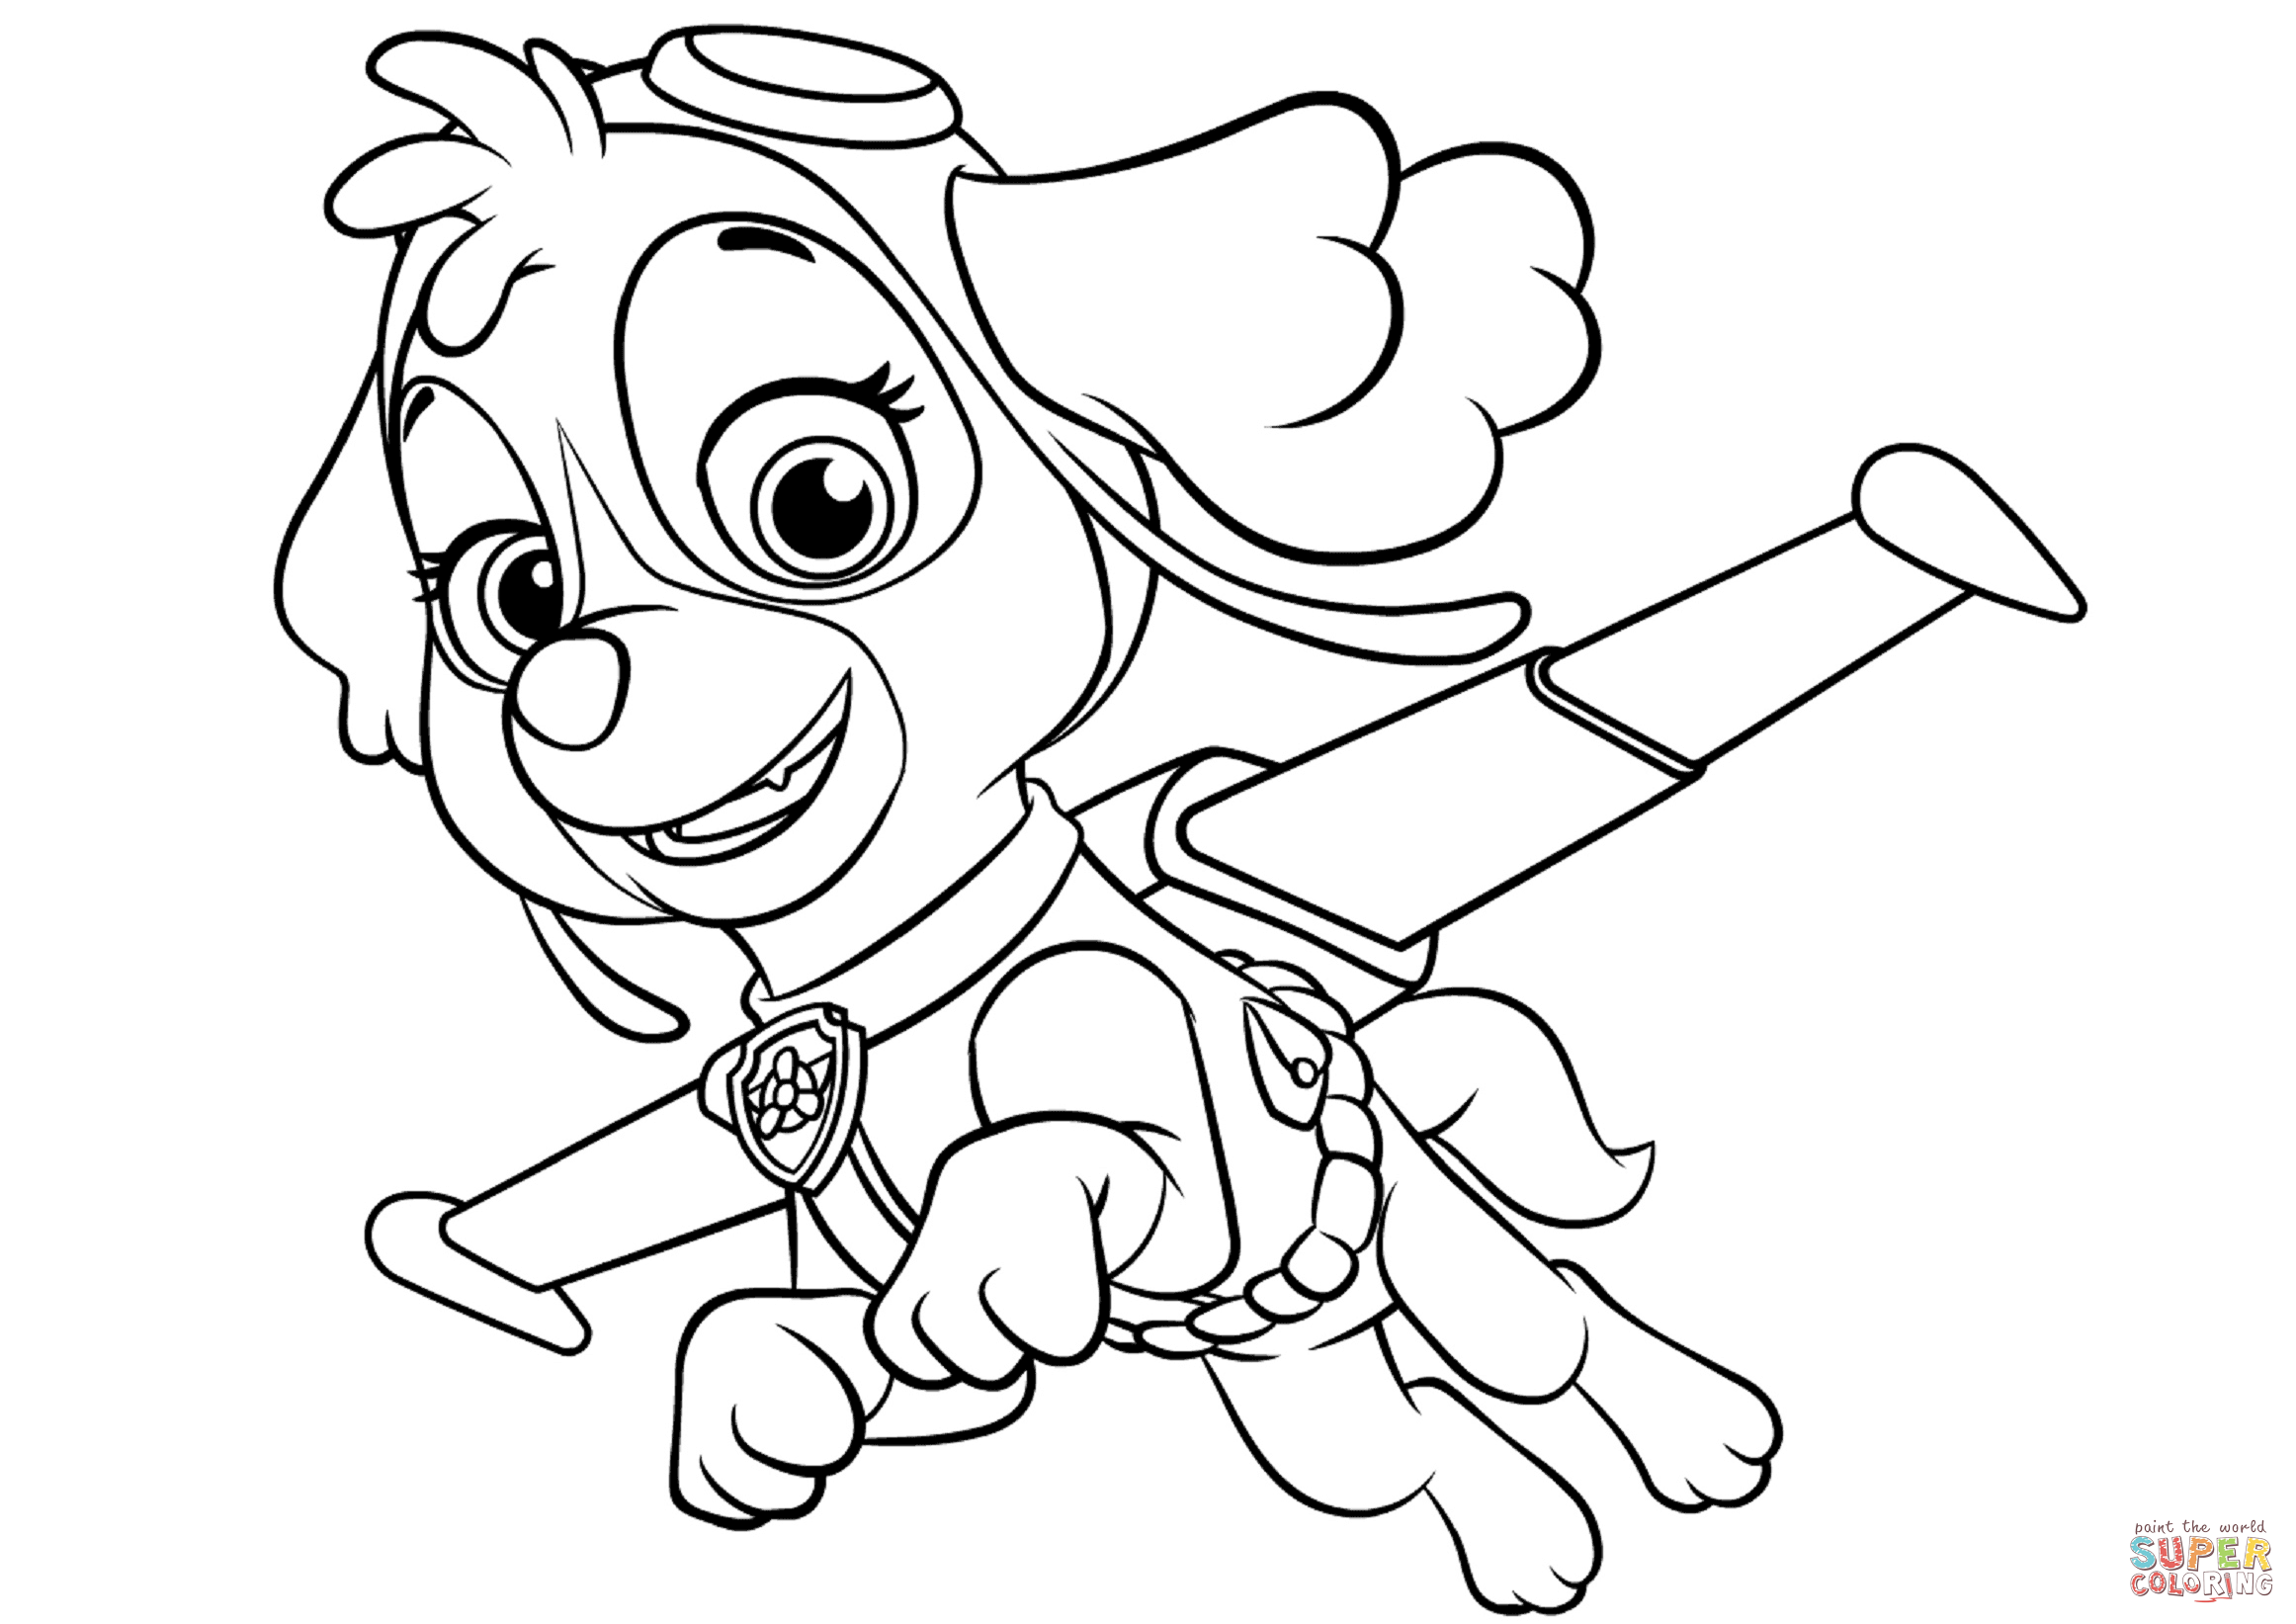 Skye flying coloring page free printable coloring pages